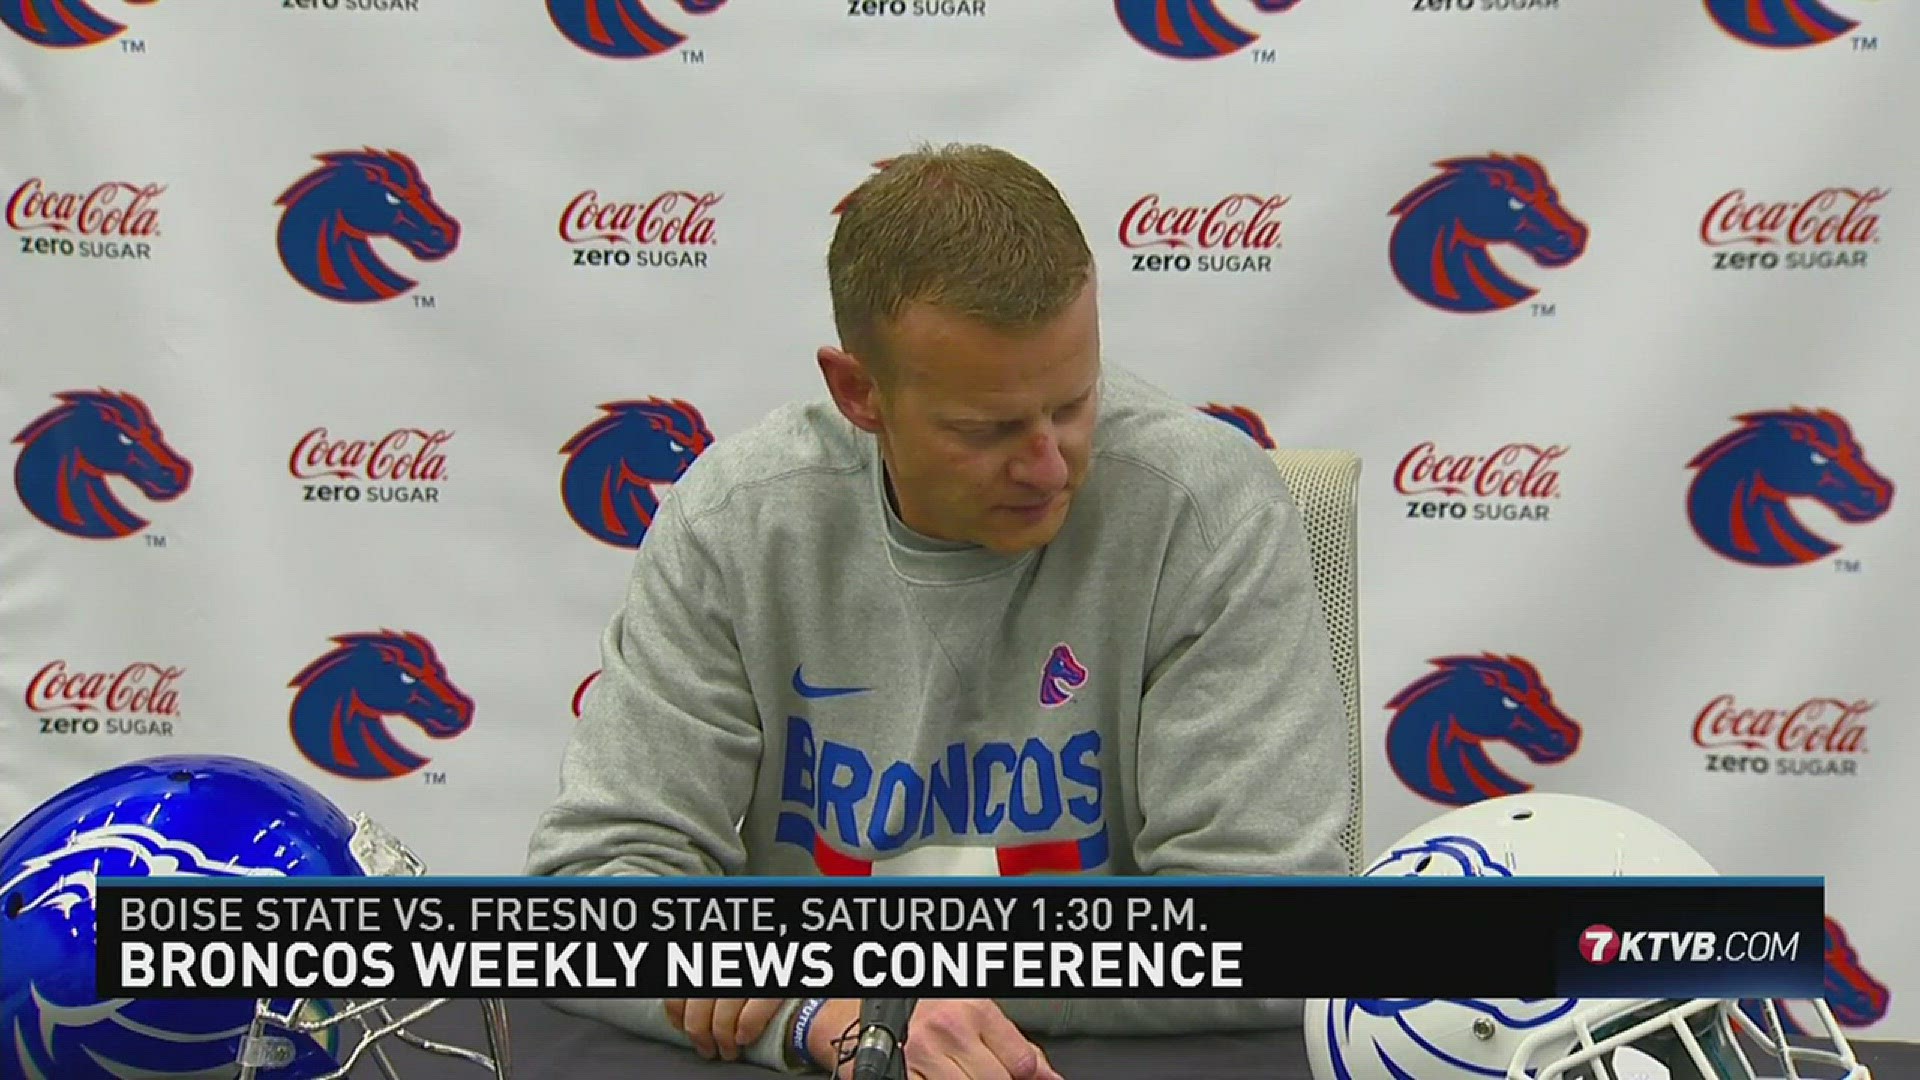 Boise State coach Bryan Harsin discusses playing Fresno State in back-to-back weeks.